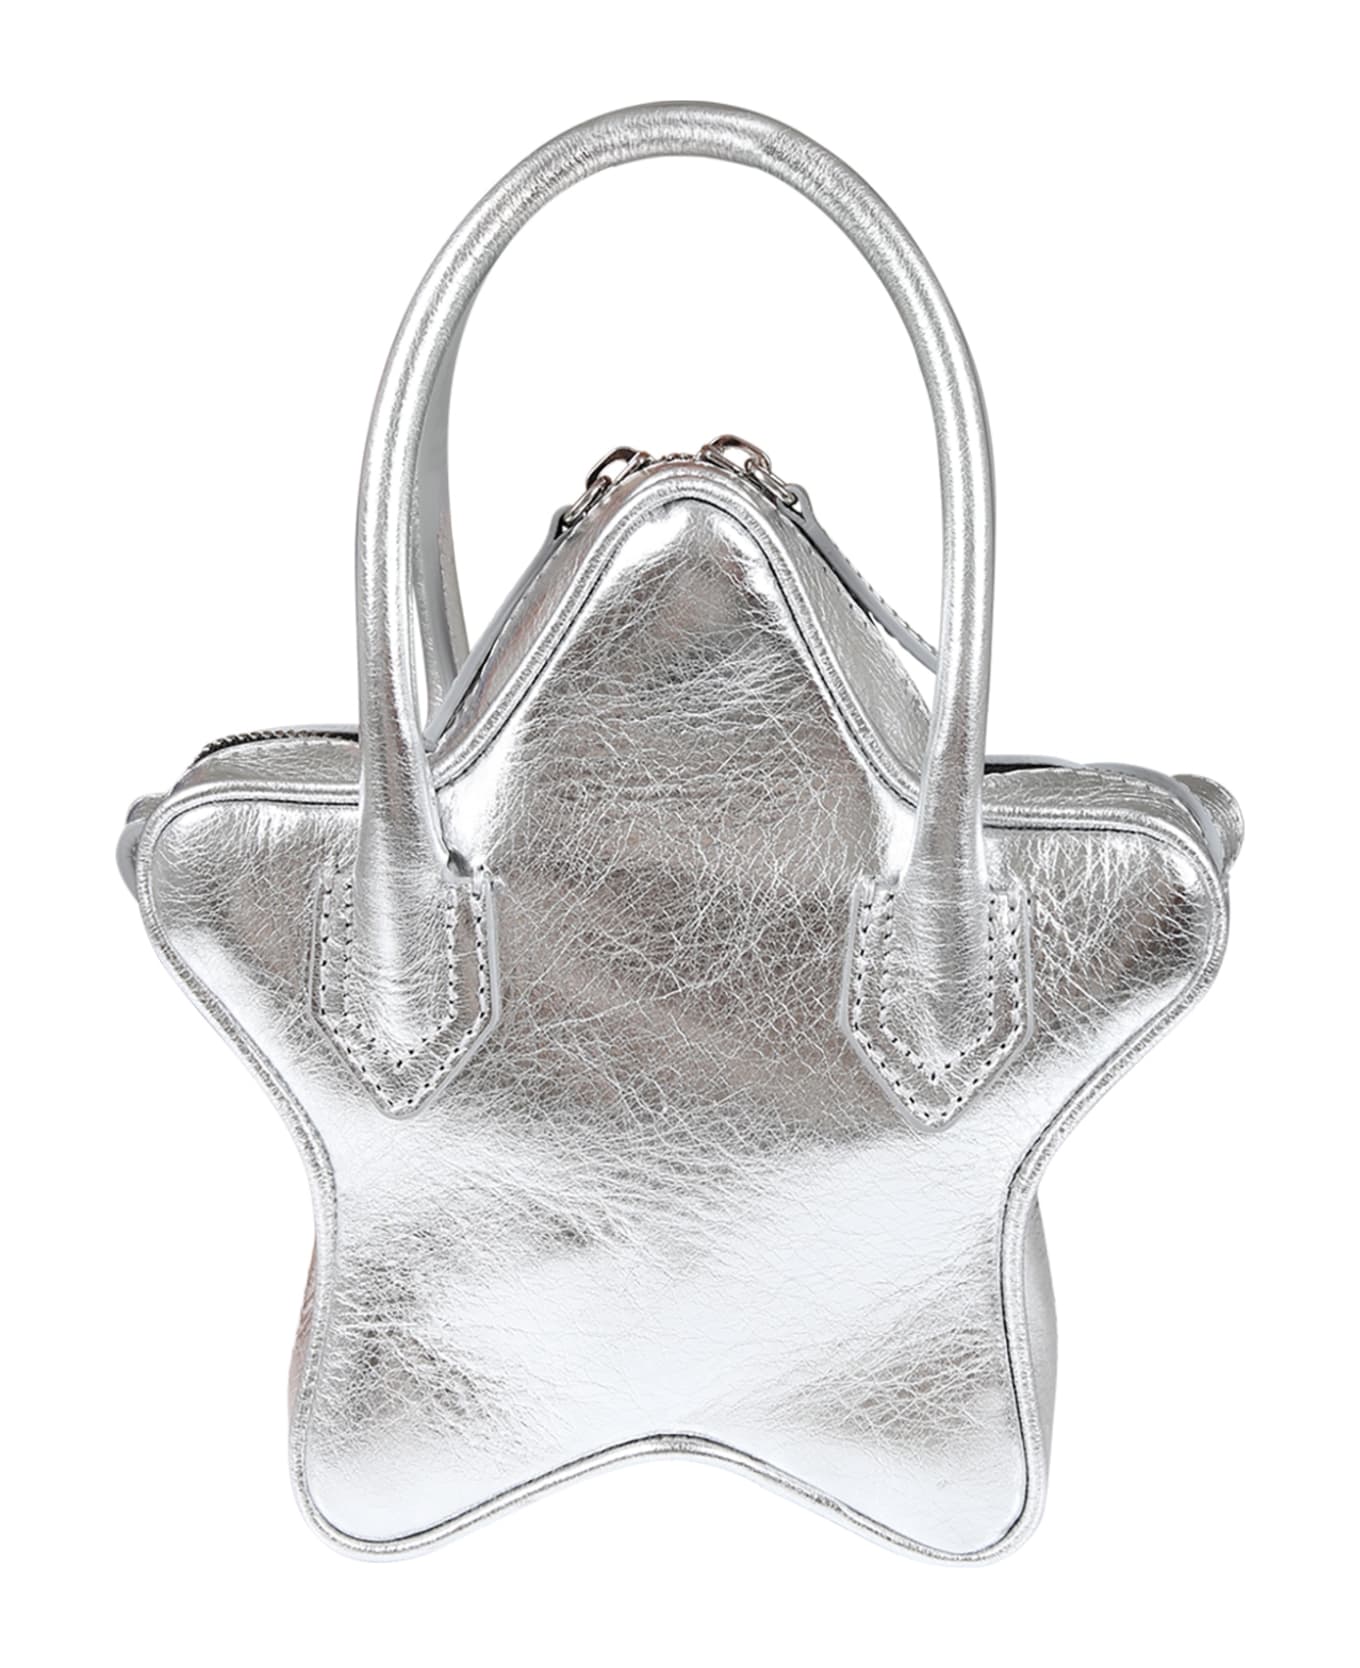 Young Versace Silver Bag For Girl With Medusa - P Argento Palladio アクセサリー＆ギフト